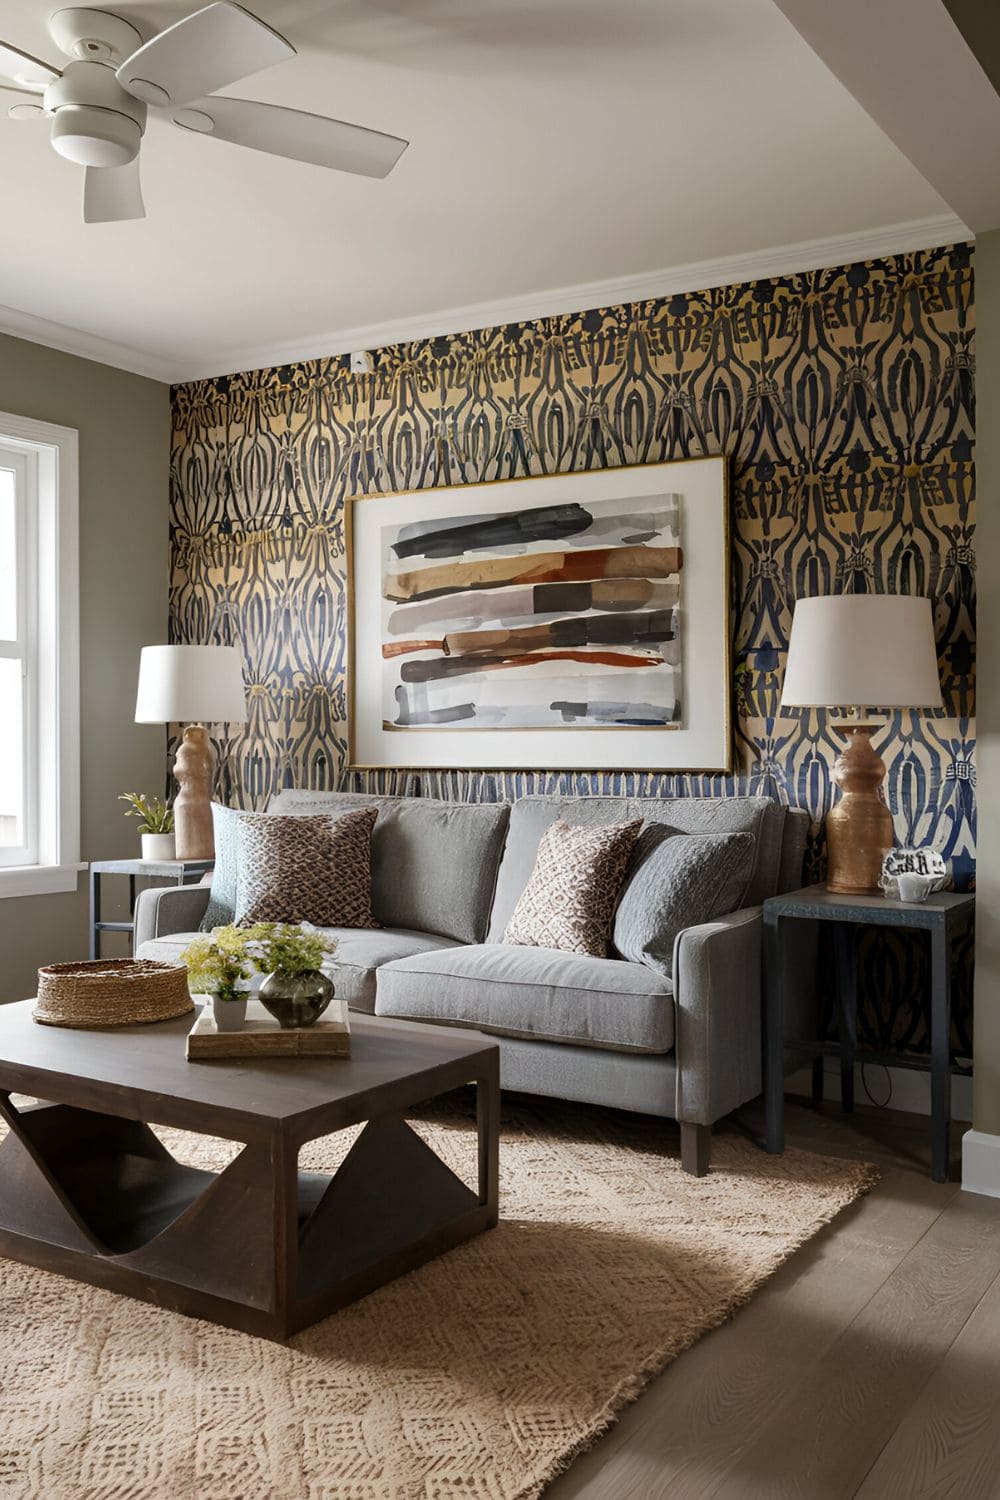 Living room wall with a bold, patterned wallpaper accent behind a sofa, surrounded by complementary wall colors